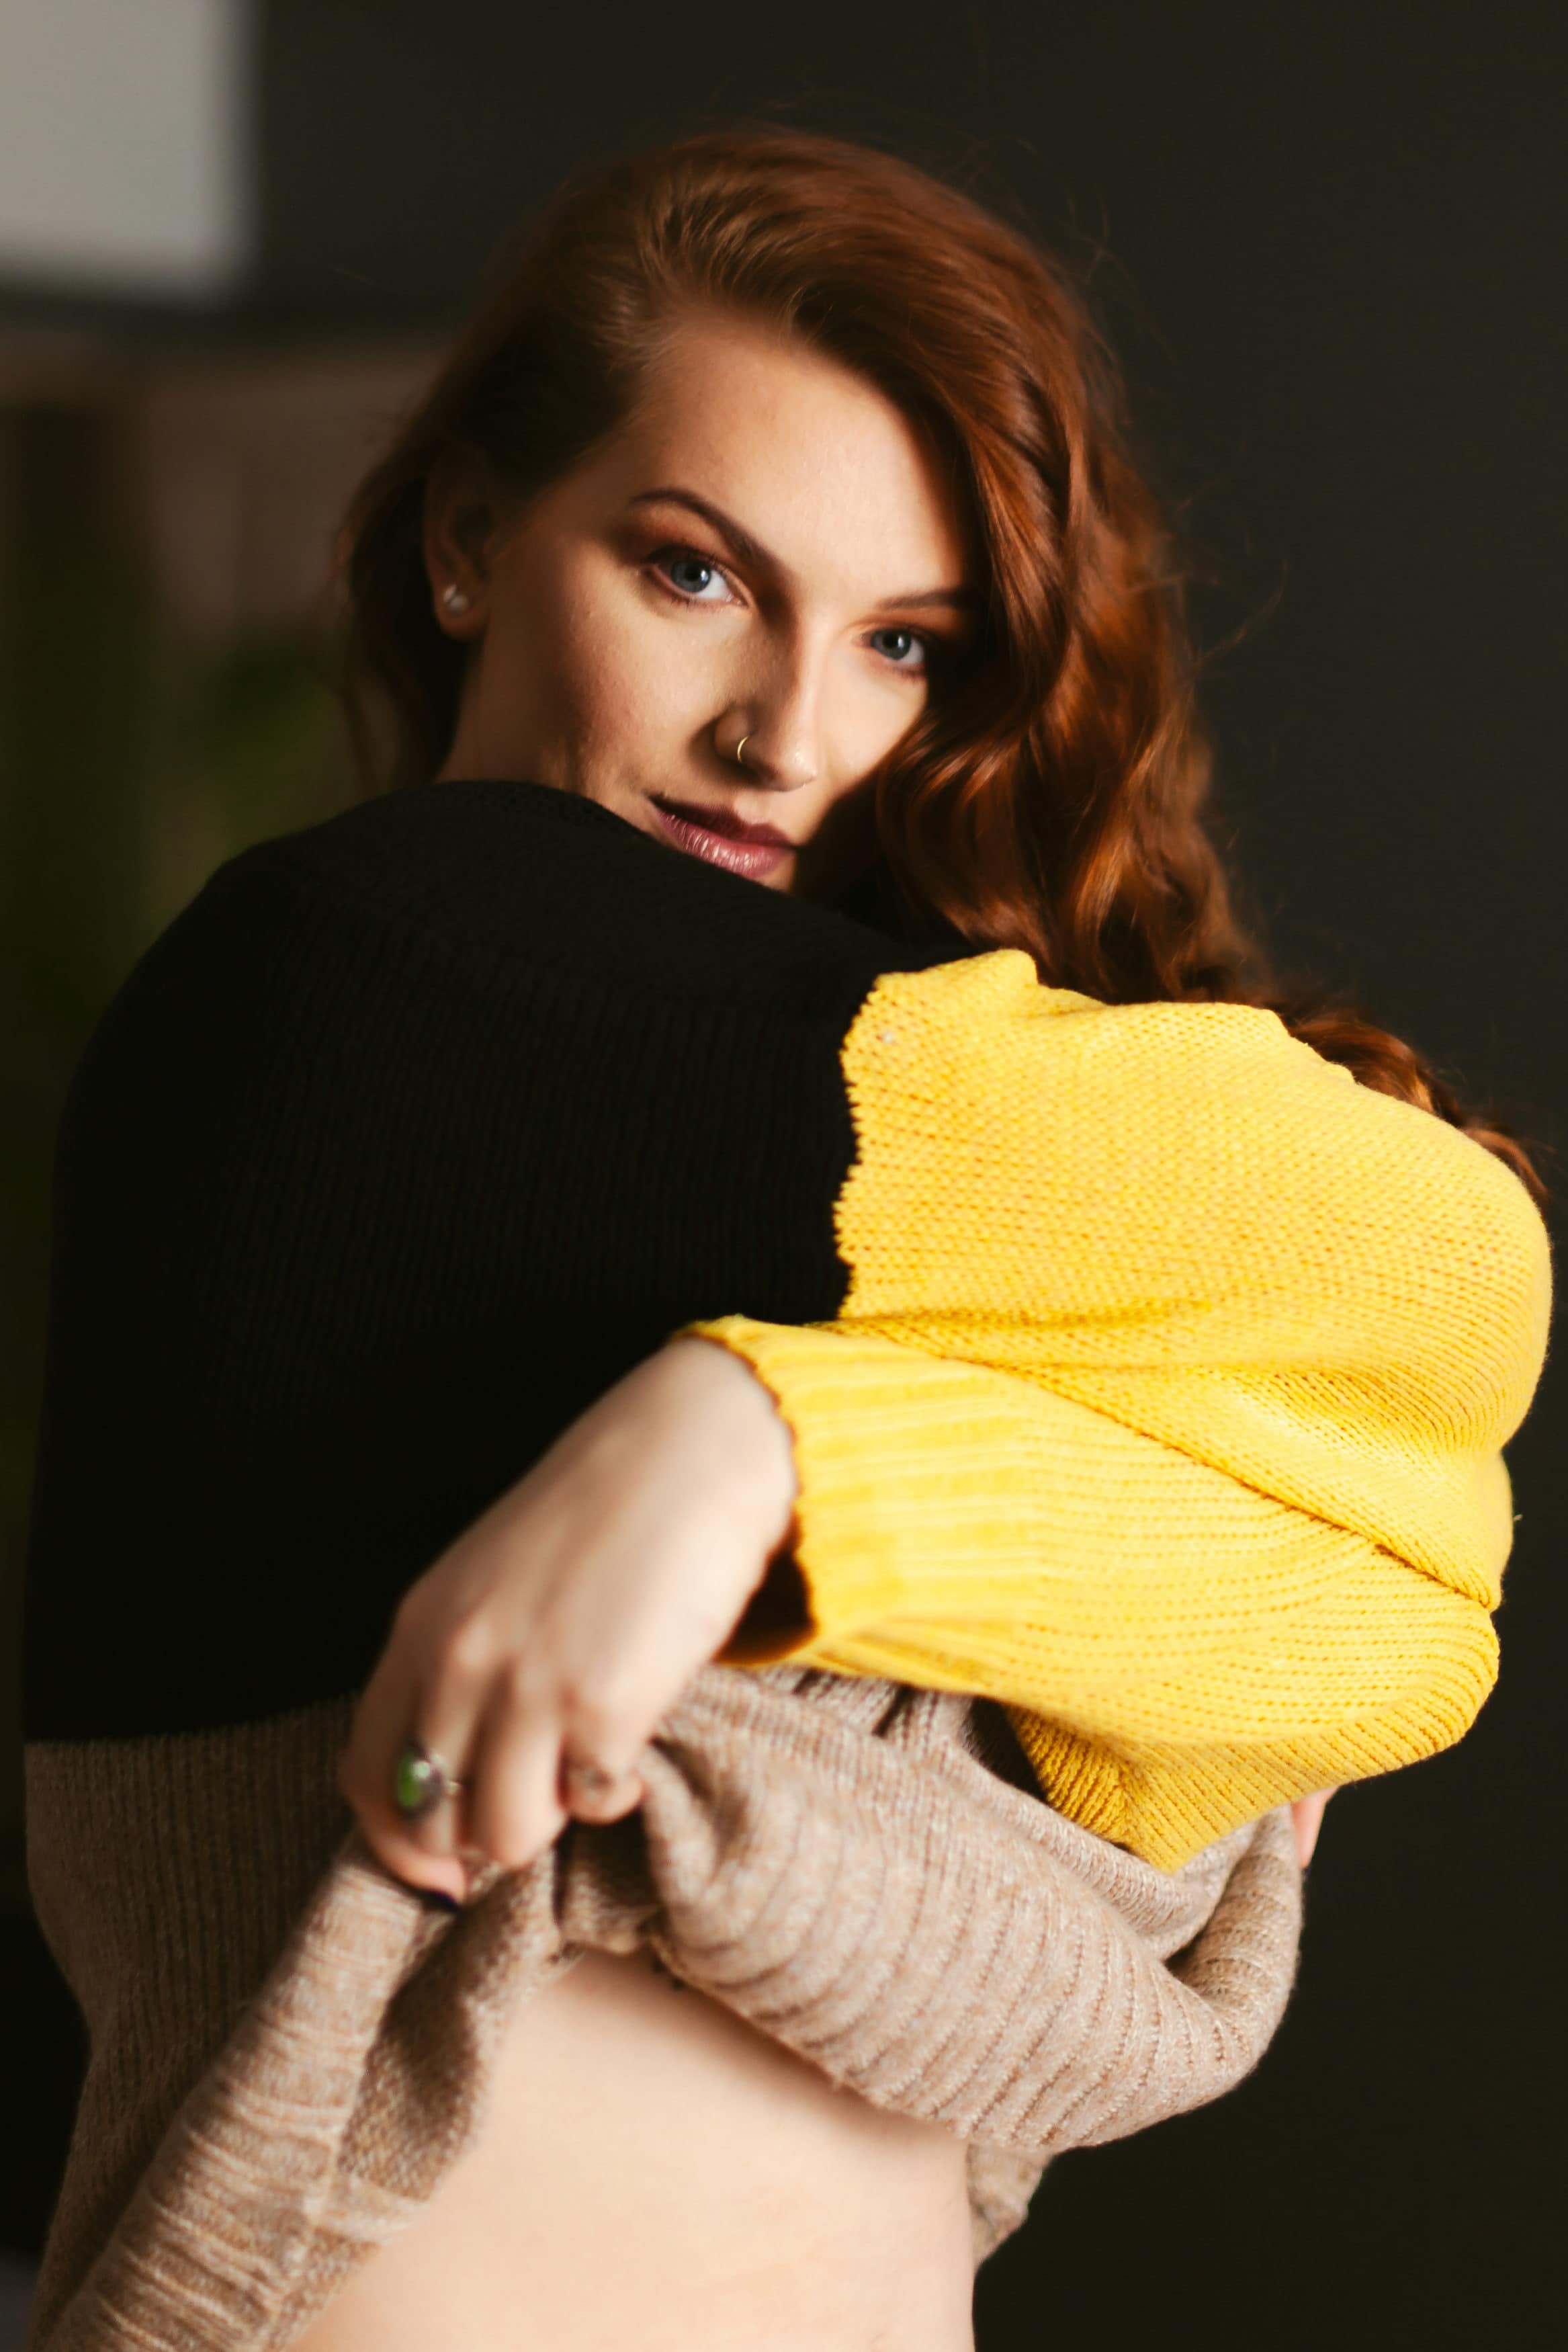 Woman taking off her sweater